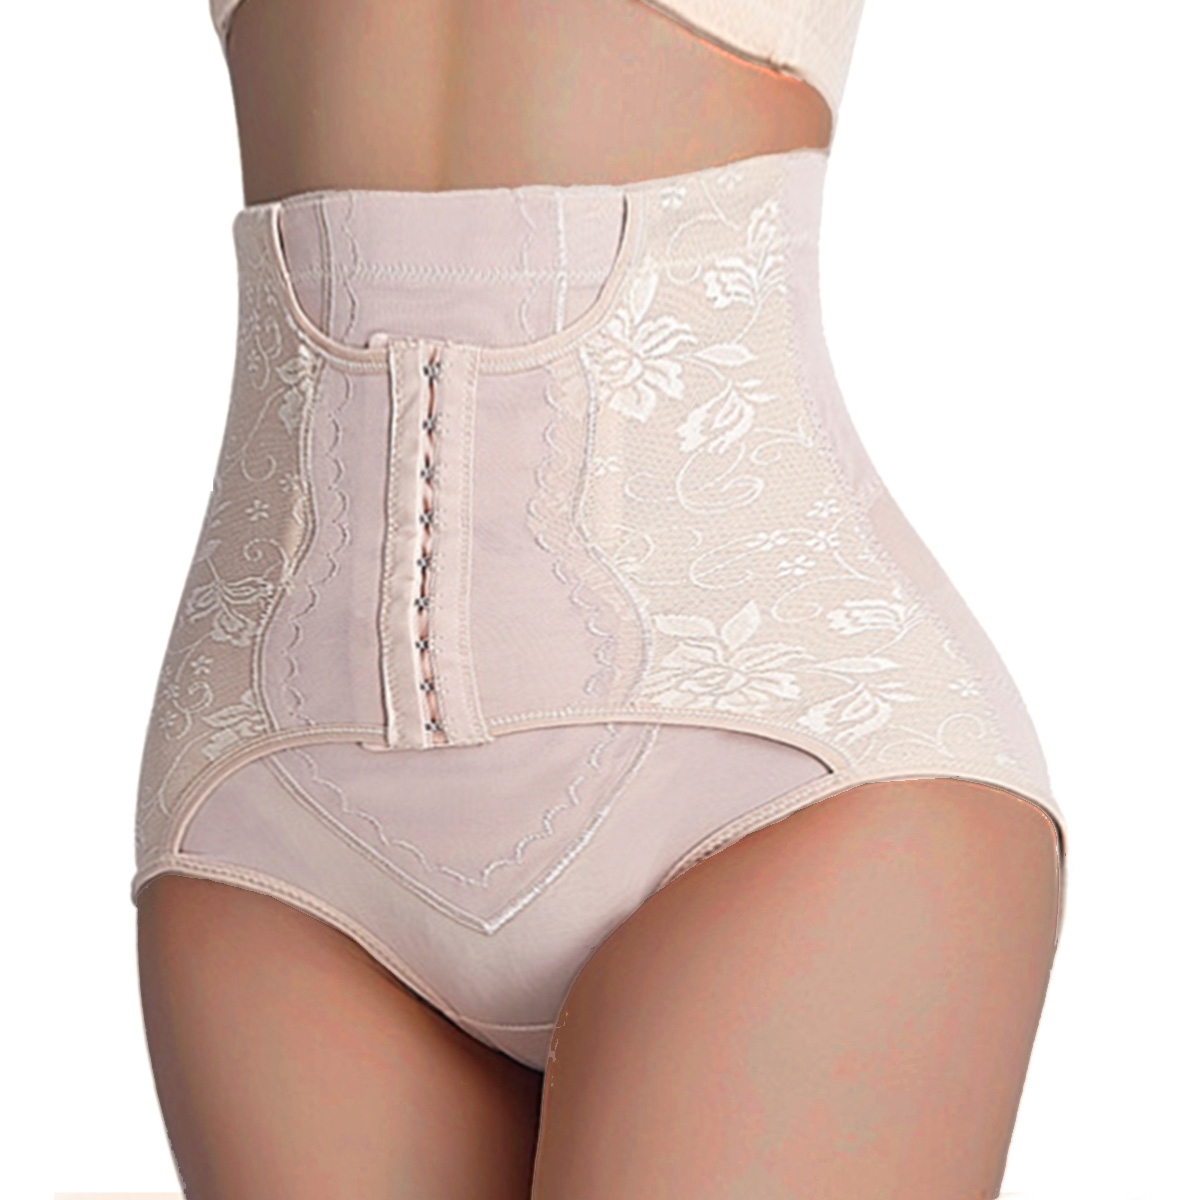 https://www.florencehappy.co.uk/images_100/Control_Knickers/Women_Control_Knickers.jpg